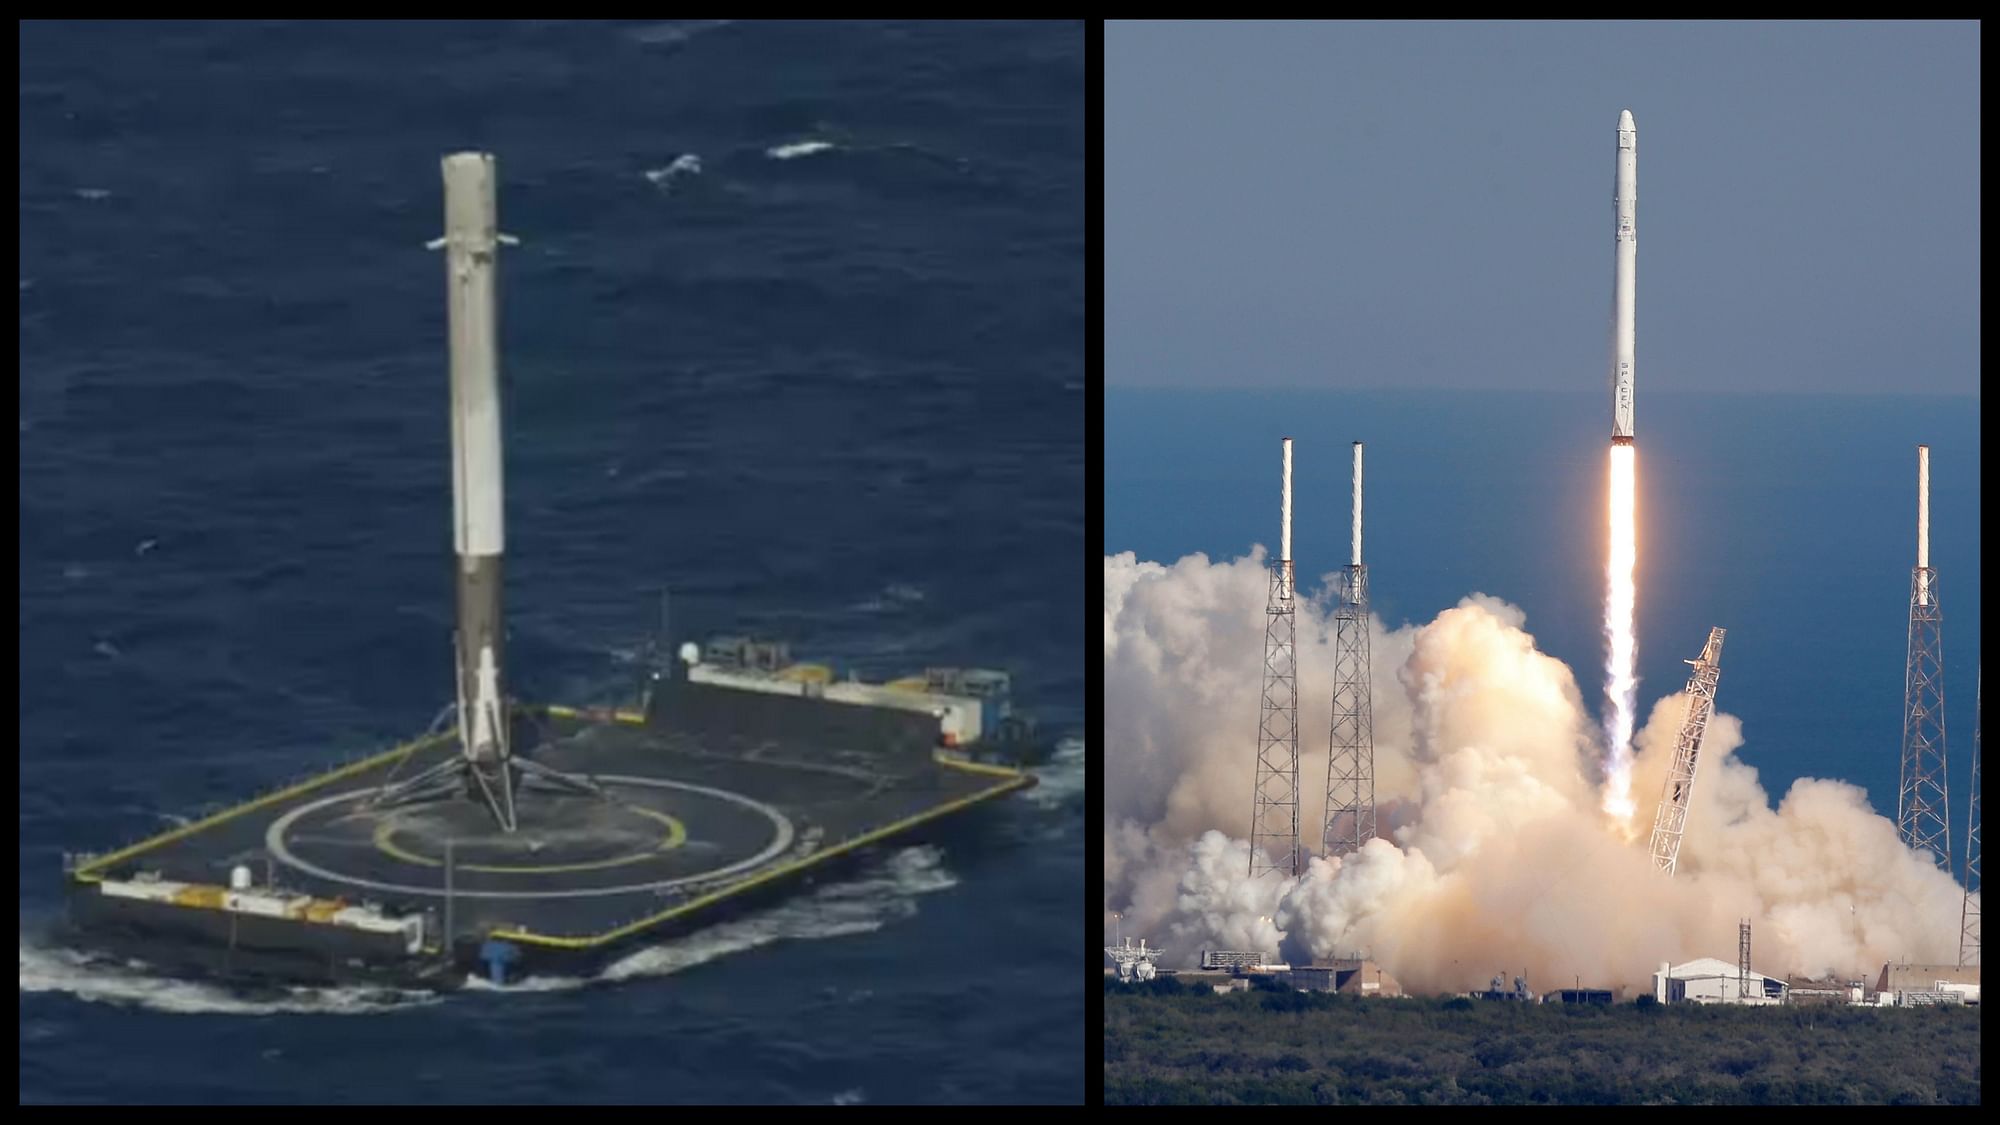 1st stage of SpaceX’s Falcon 9 rocket after landing on a floating barrage in the ocean (L). The rocket’s earlier lift off with an important payload for the International Space Station. (Photo: SpaceX/AP)